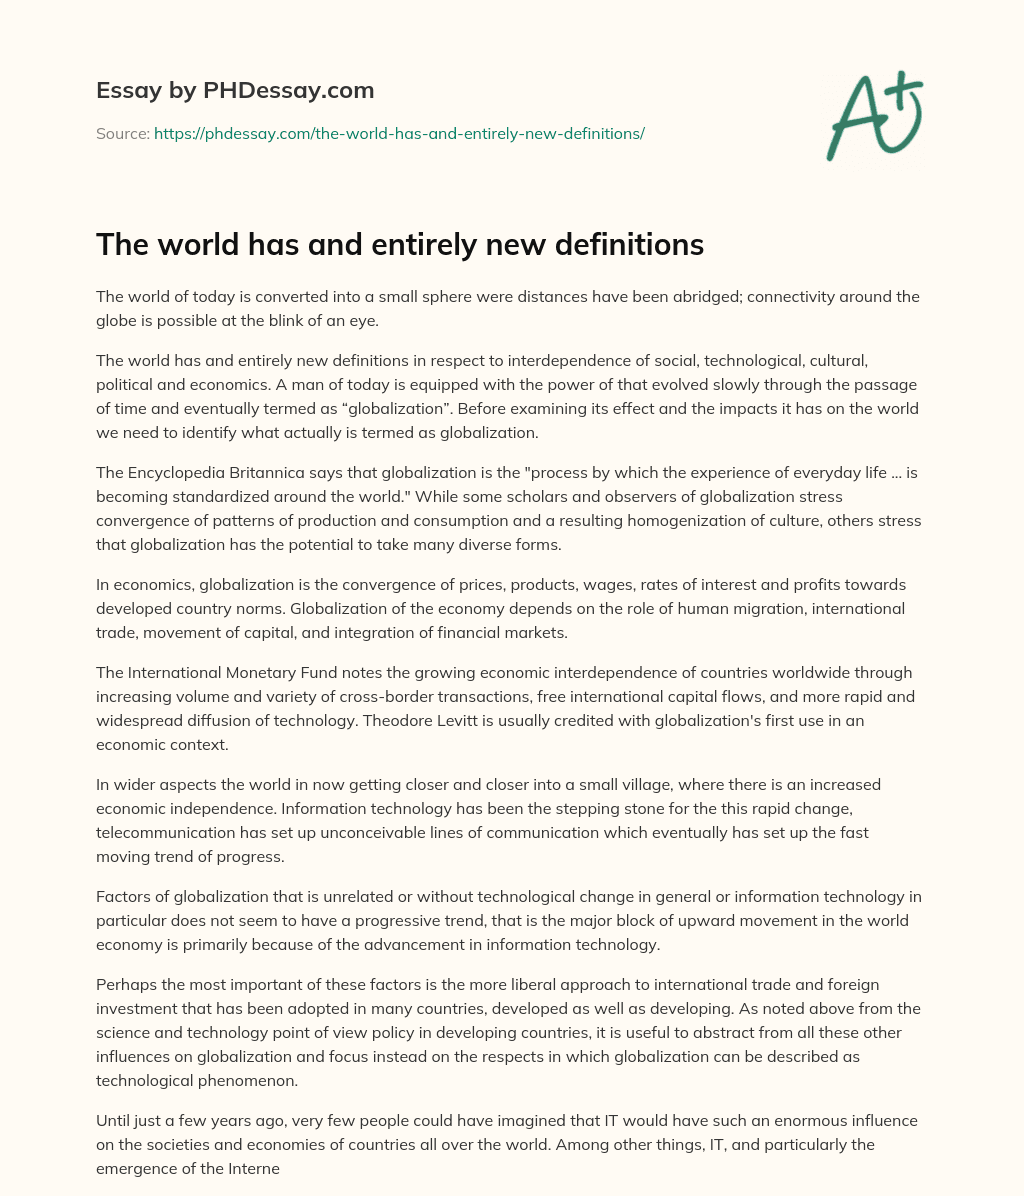 The world has and entirely new definitions essay